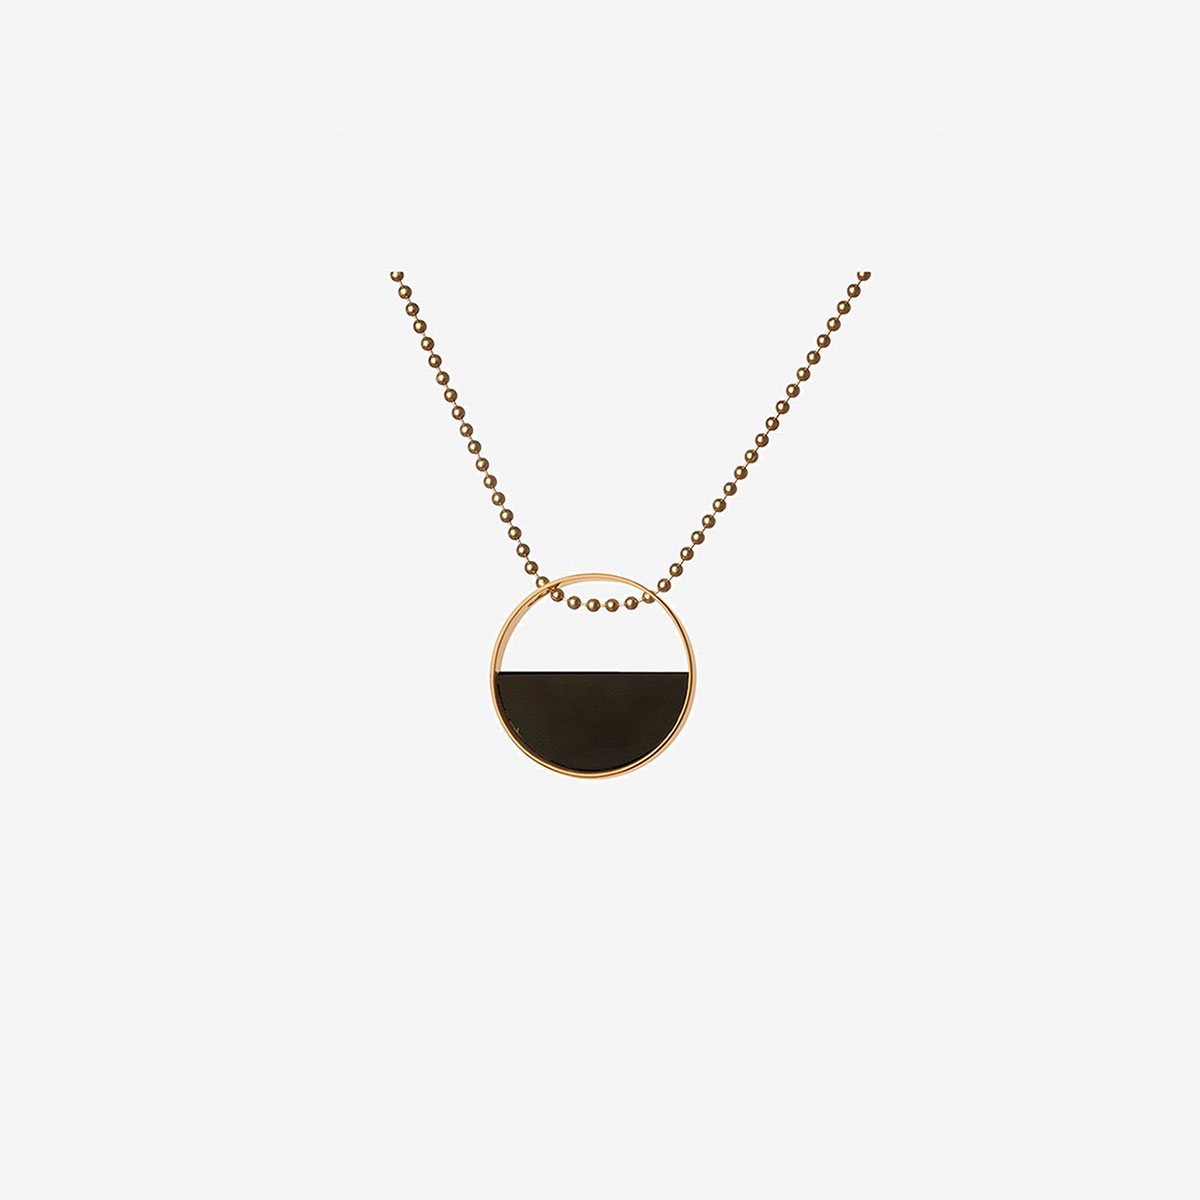 Handmade 9k or 18k gold, sterling silver and onyx necklace designed by Belen Bajo